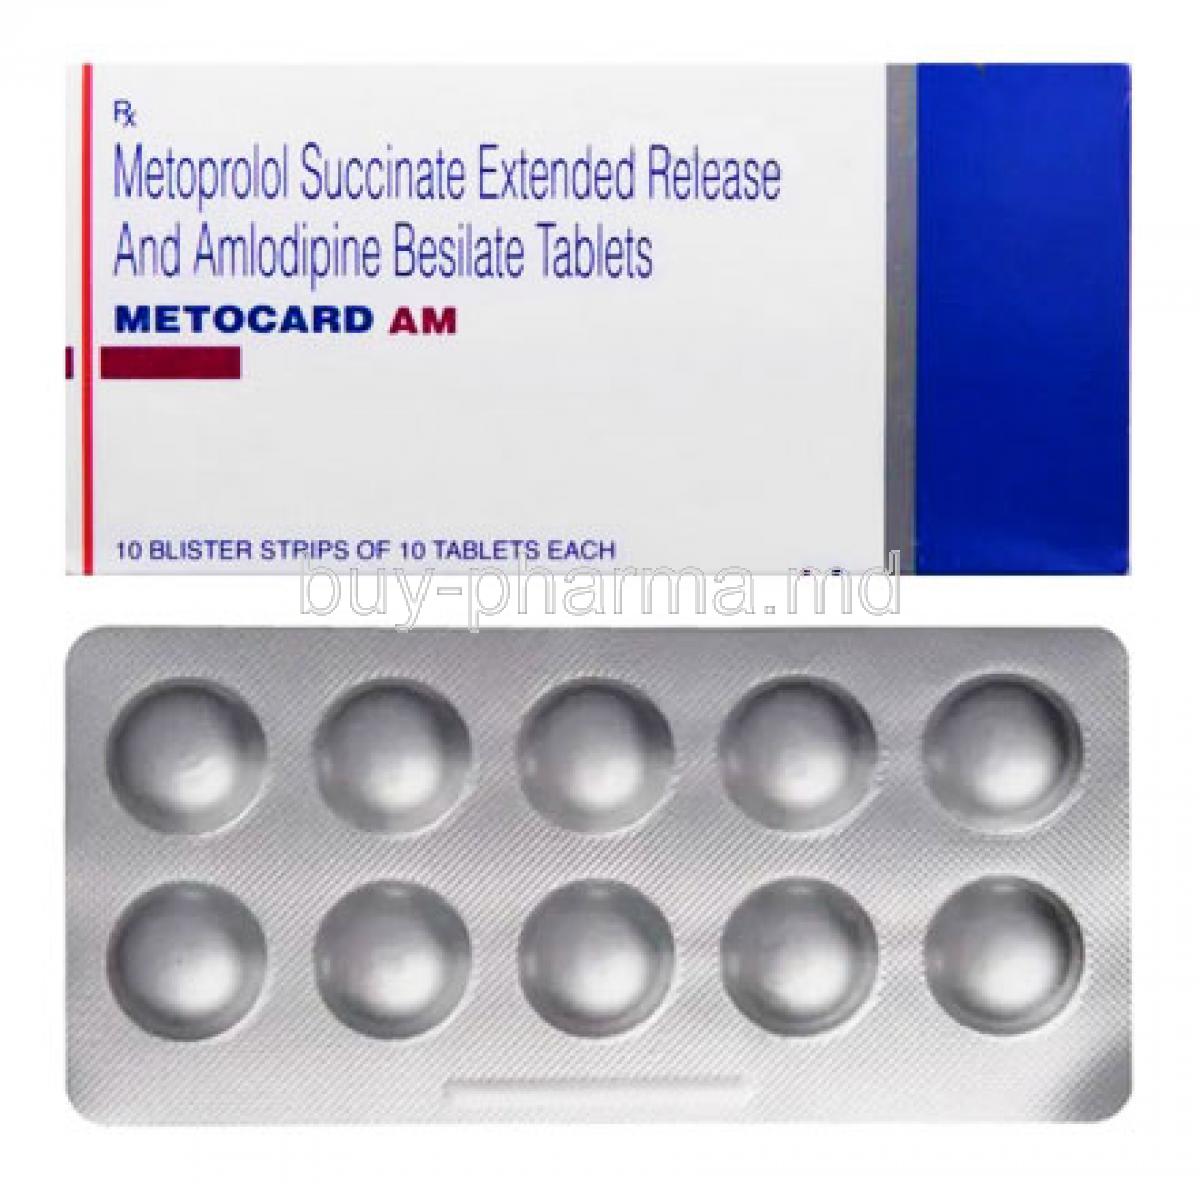 Metocard AM, Metoprolol and Amlodipine box and tablets